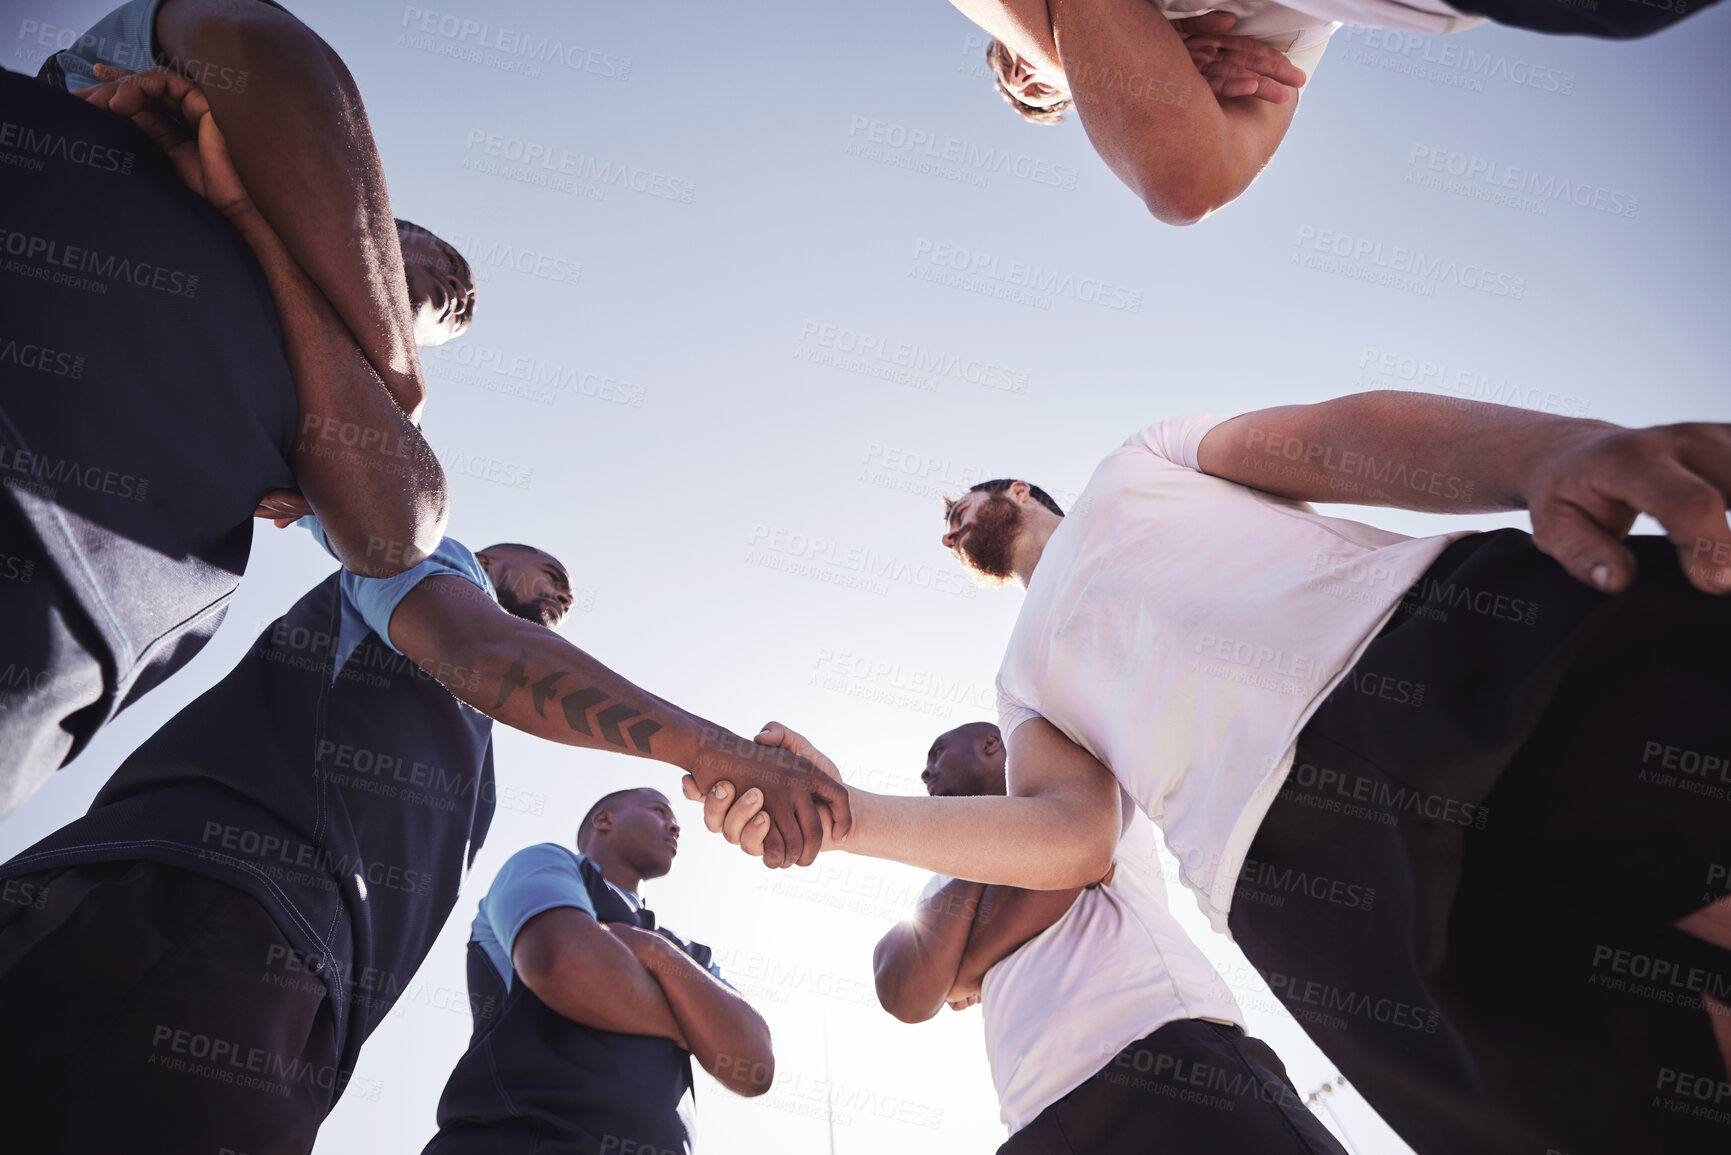 Buy stock photo Below two opponent rugby teams shaking hands before or after a match outside on a field. Rugby players sharing a handshake to show respect and sportsmanship. A mutual understanding of the game